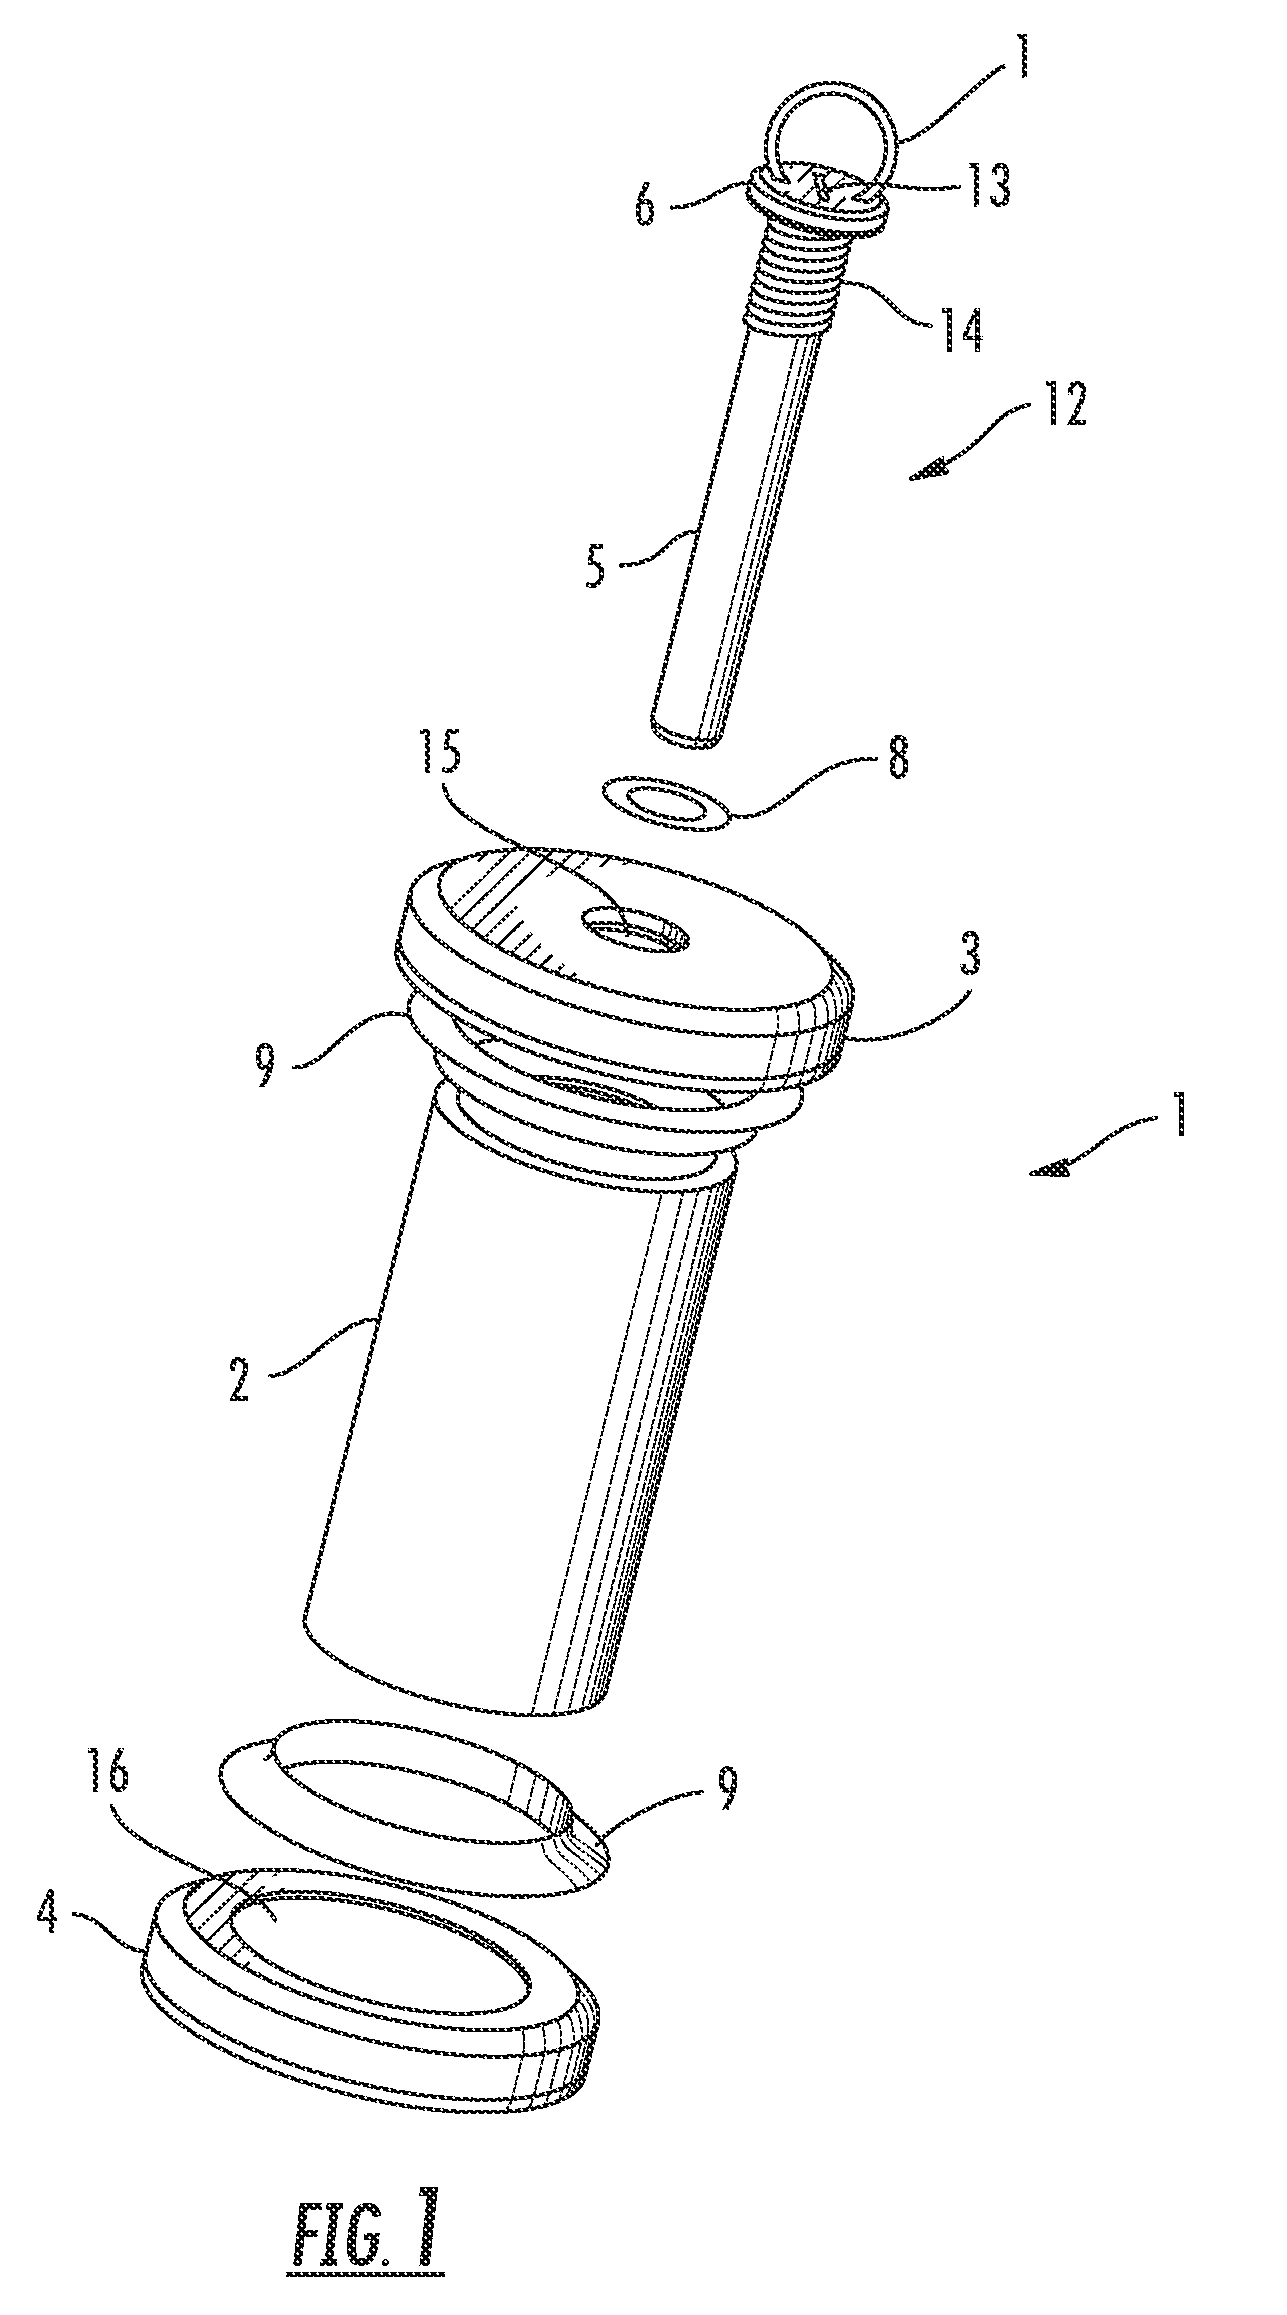 Non-chemical fly repellant device